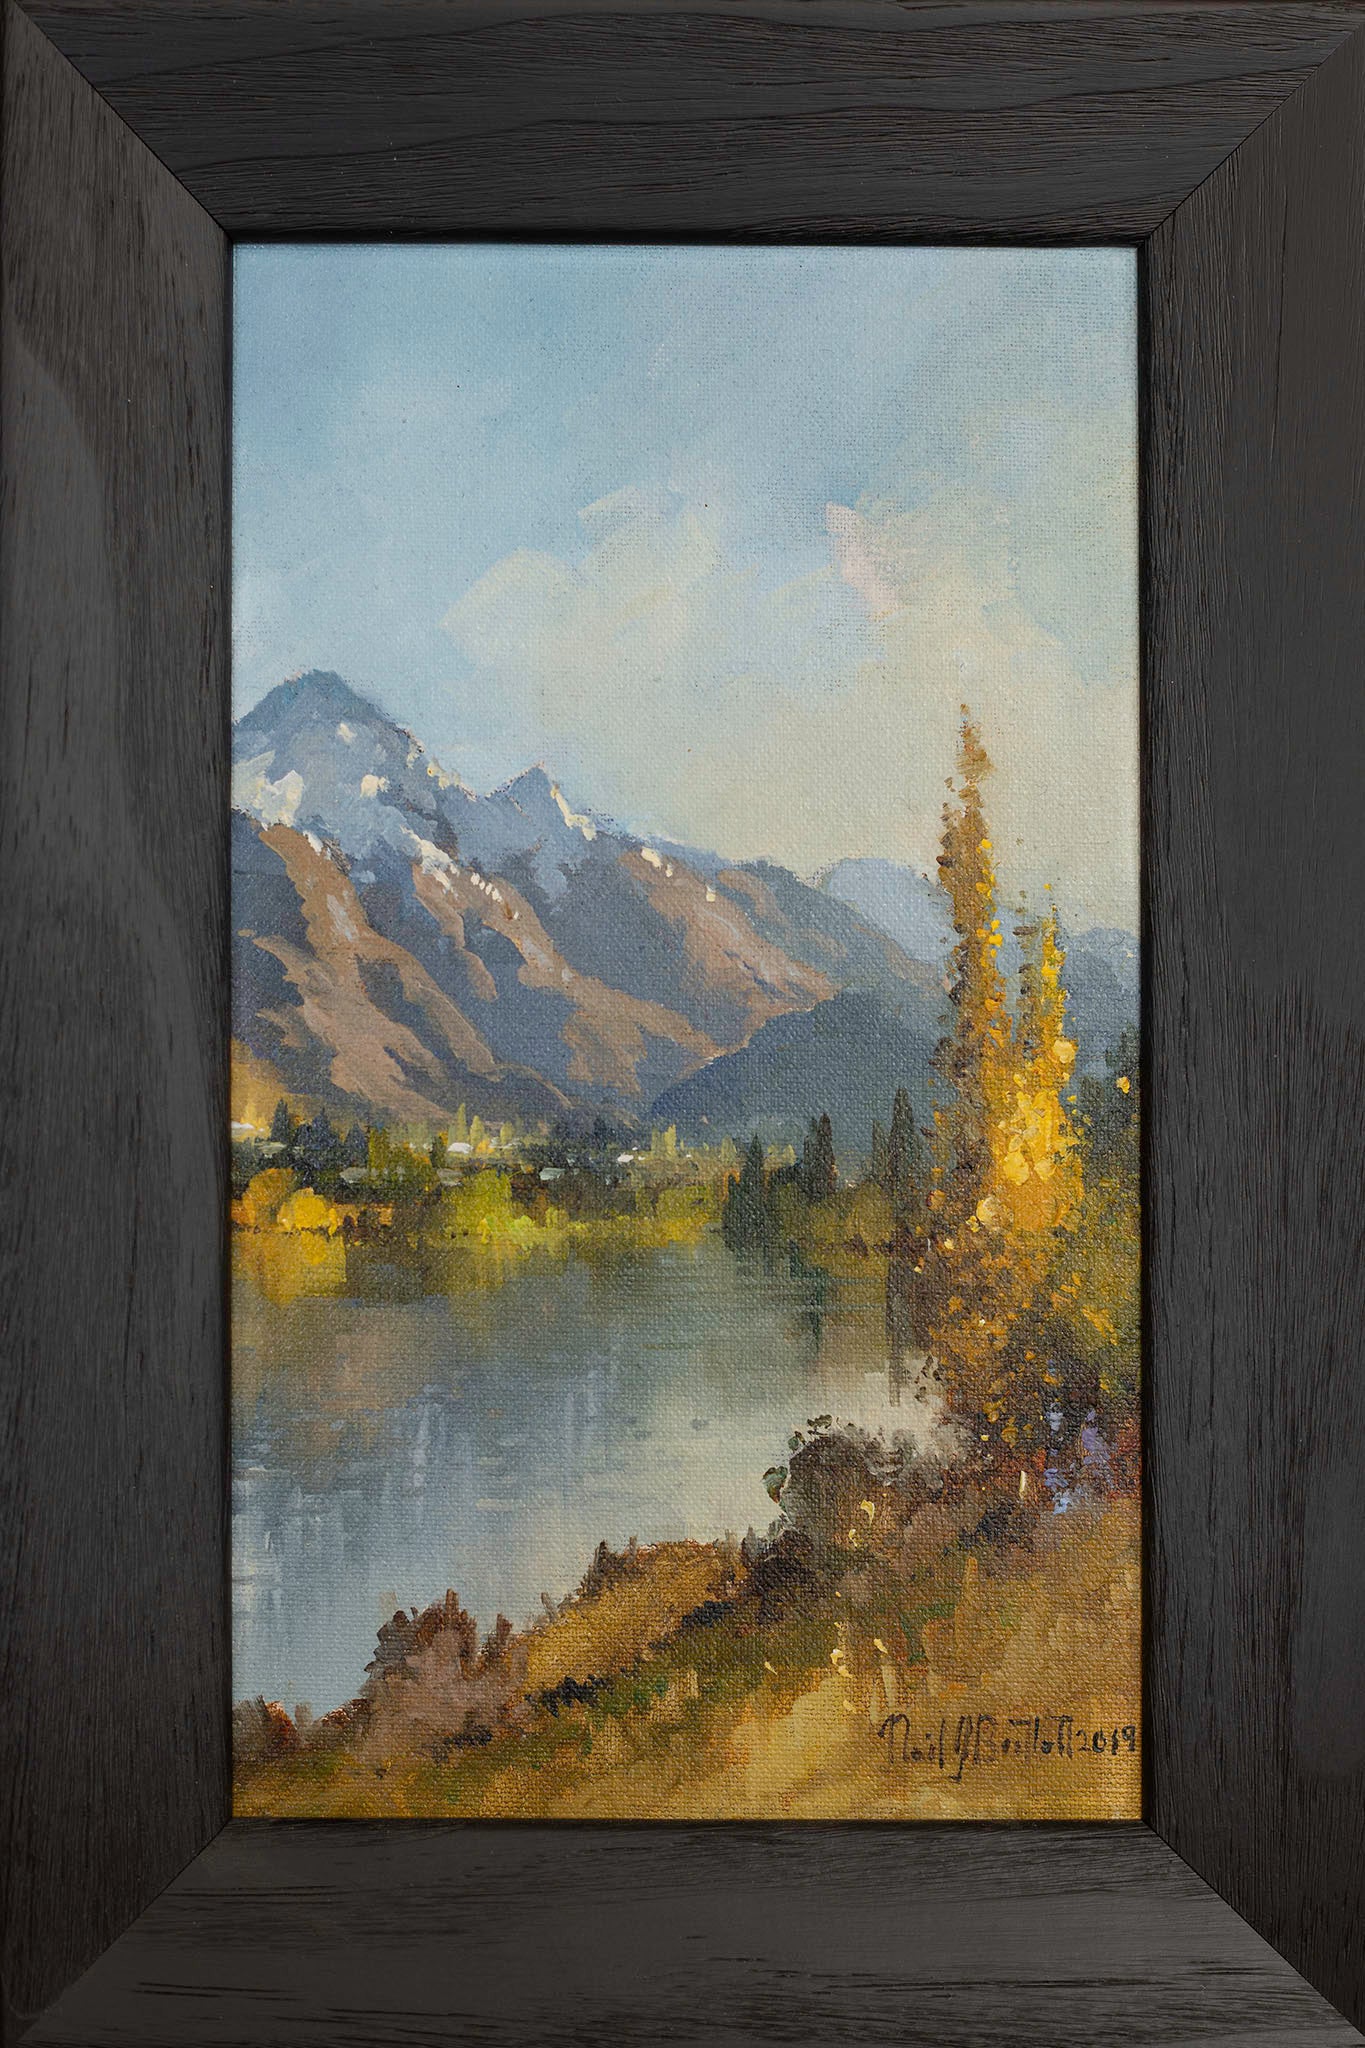 Framed Oil Painting by renowned landscape artist Neil J Bartlett of Autumn at Lake Hayes near Queenstown NZ Silver Fern Gallery